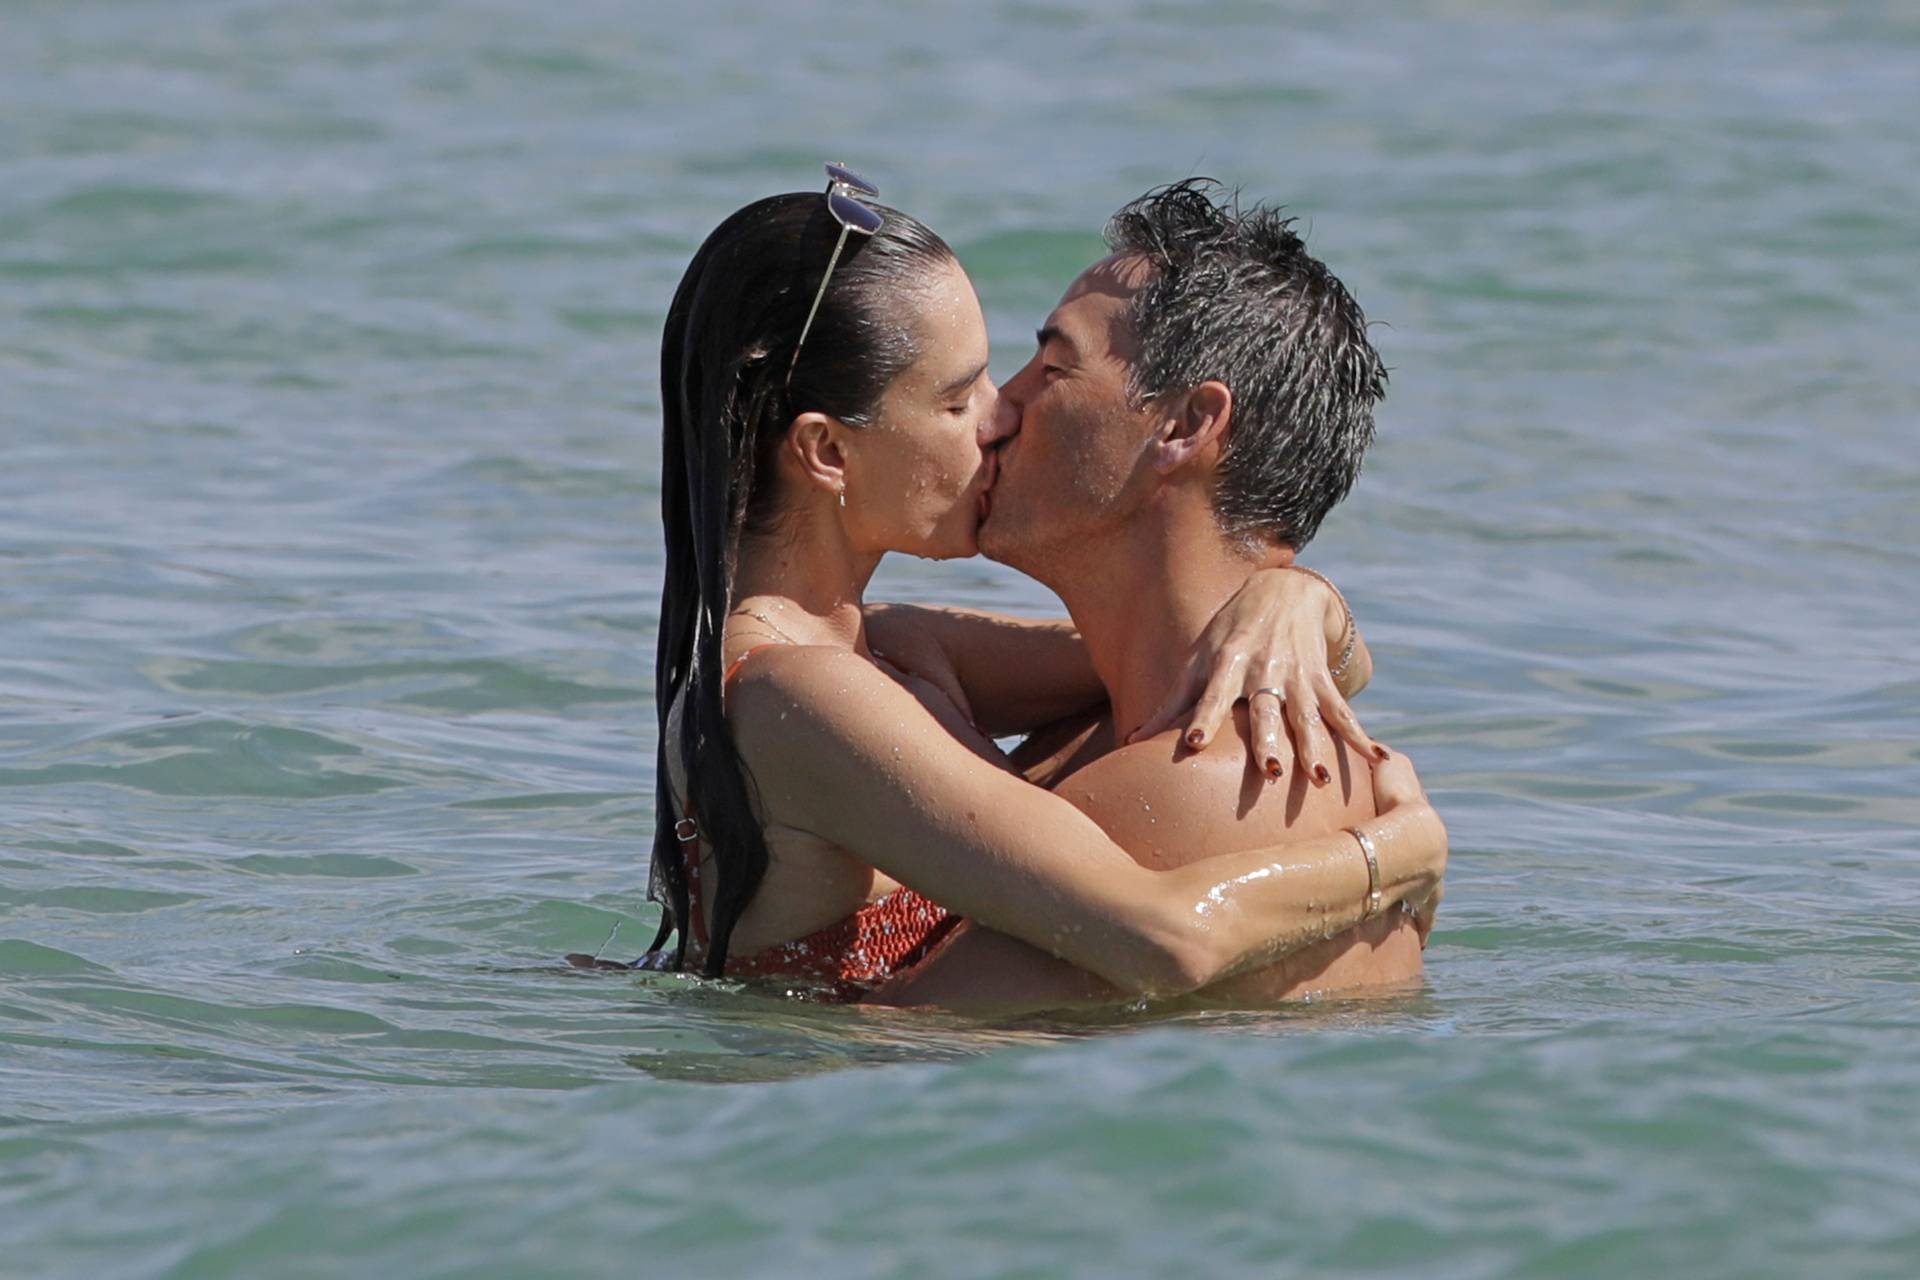 EXCLUSIVE: Alessandra Ambrosio looks stunning as she takes a dip in the ocean while on vacation in Hawaii with her boyfriend Richard Lee